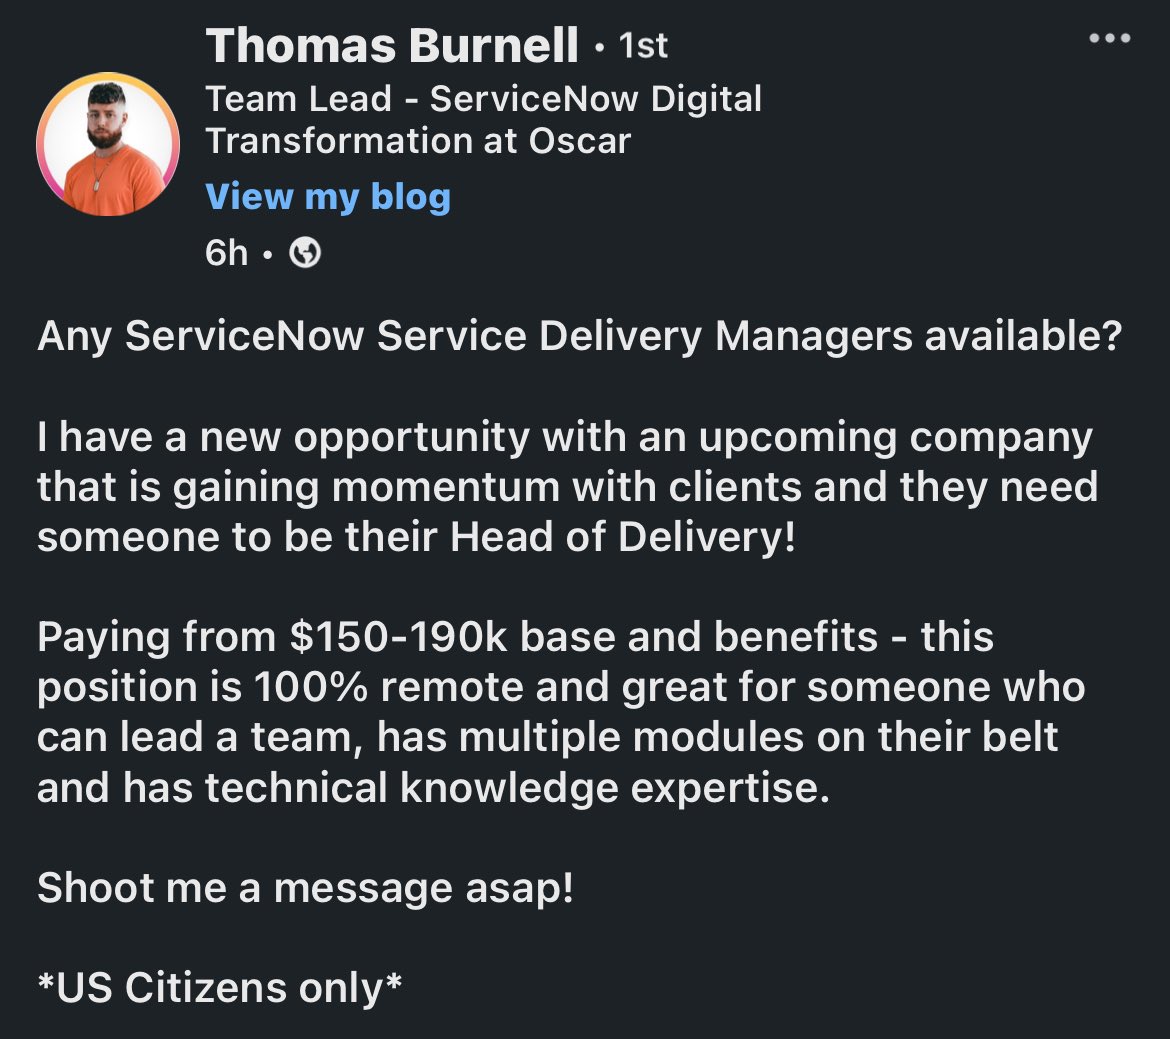 Remember last week I stated there’s so much more to just ServiceNow Dev & Admin roles? Look at this! Service Delivery Managers is a great role in the SN ecosystem and the pay is immaculate.